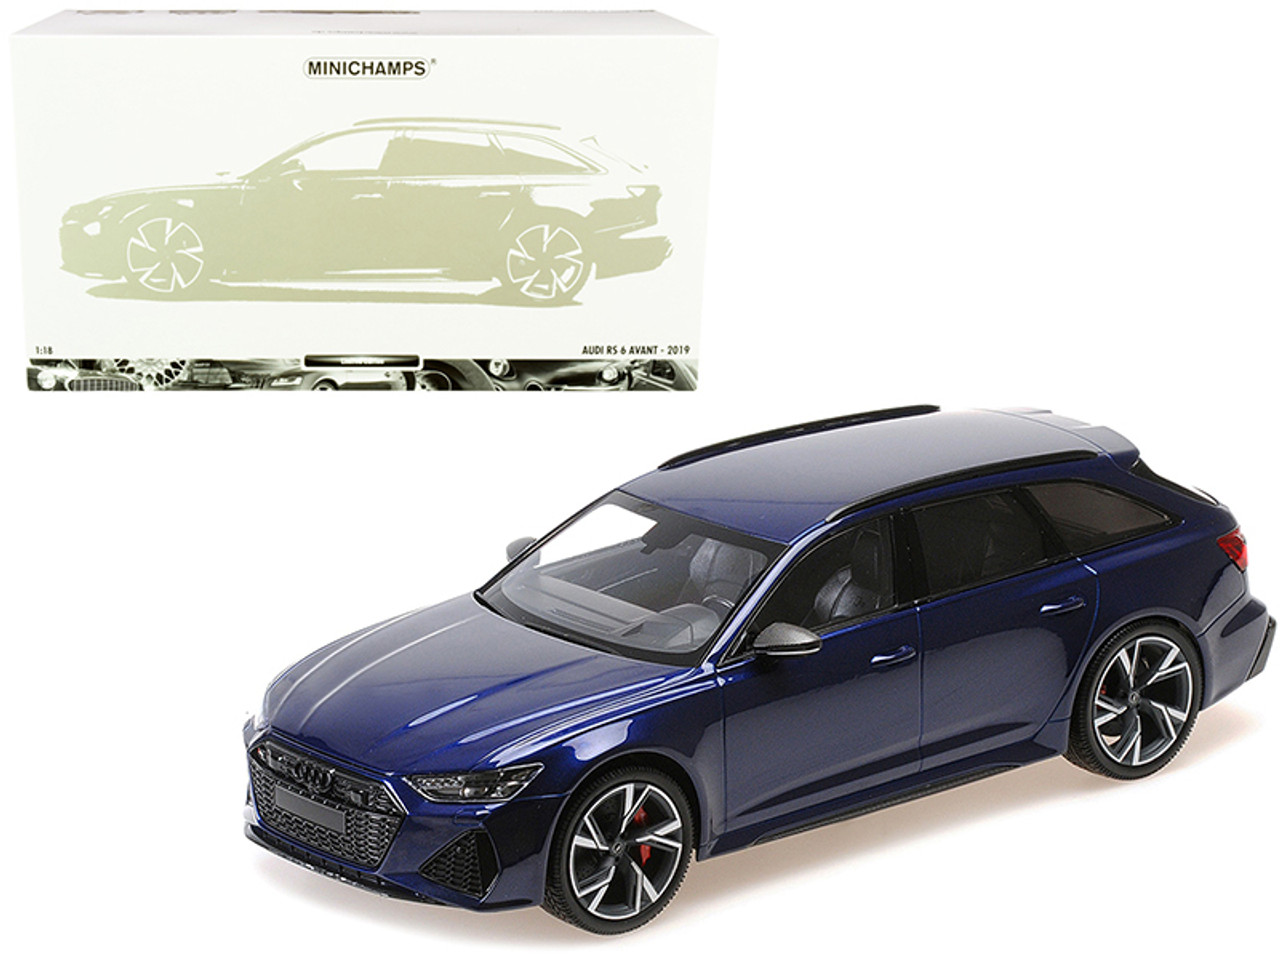 2019 Audi RS 6 Avant Blue Metallic Limited Edition to 402 pieces Worldwide 1/18 Diecast Model Car by Minichamps